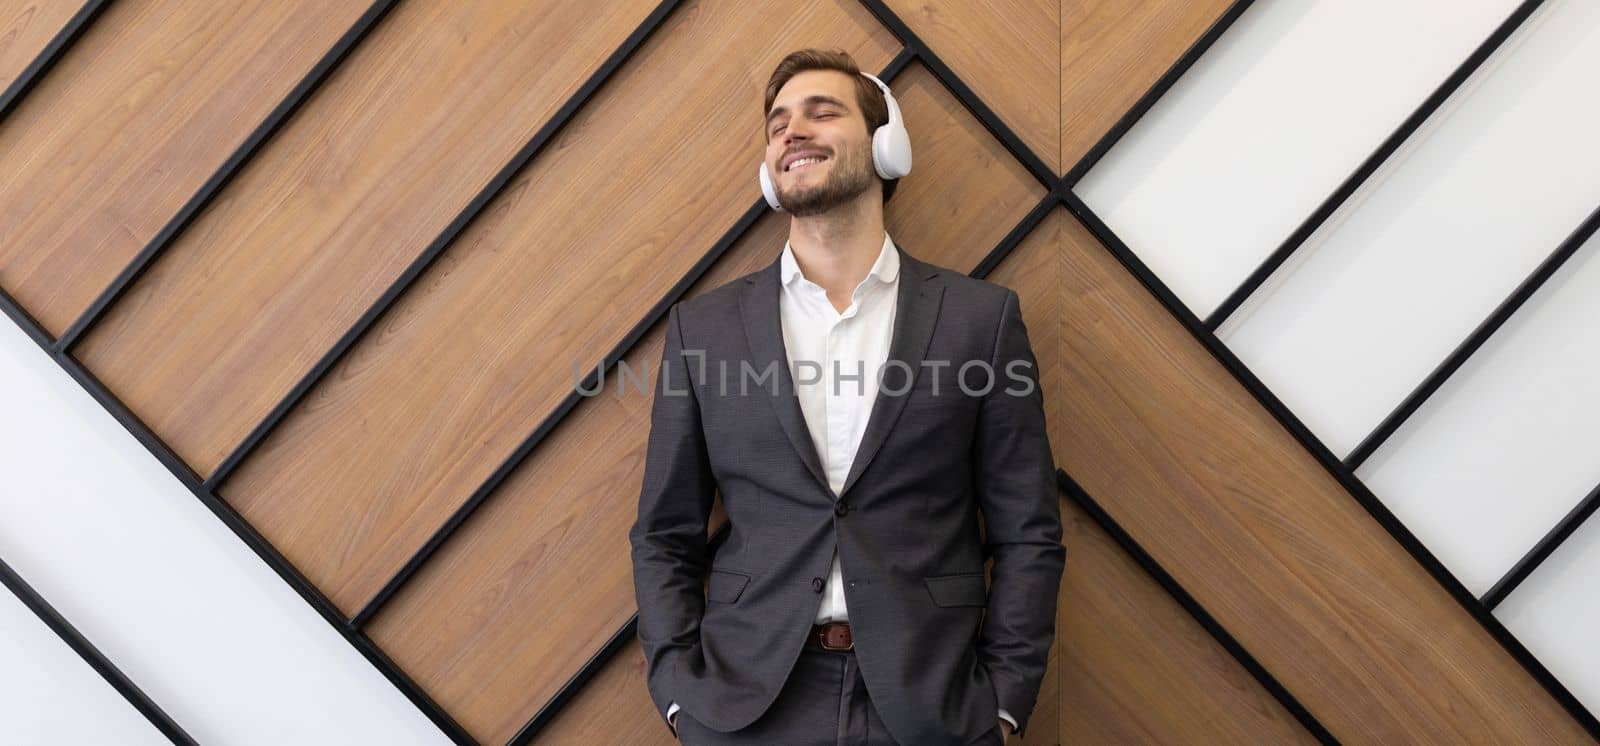 satisfied businessman in business suit listening to music with headphones with pleasure.